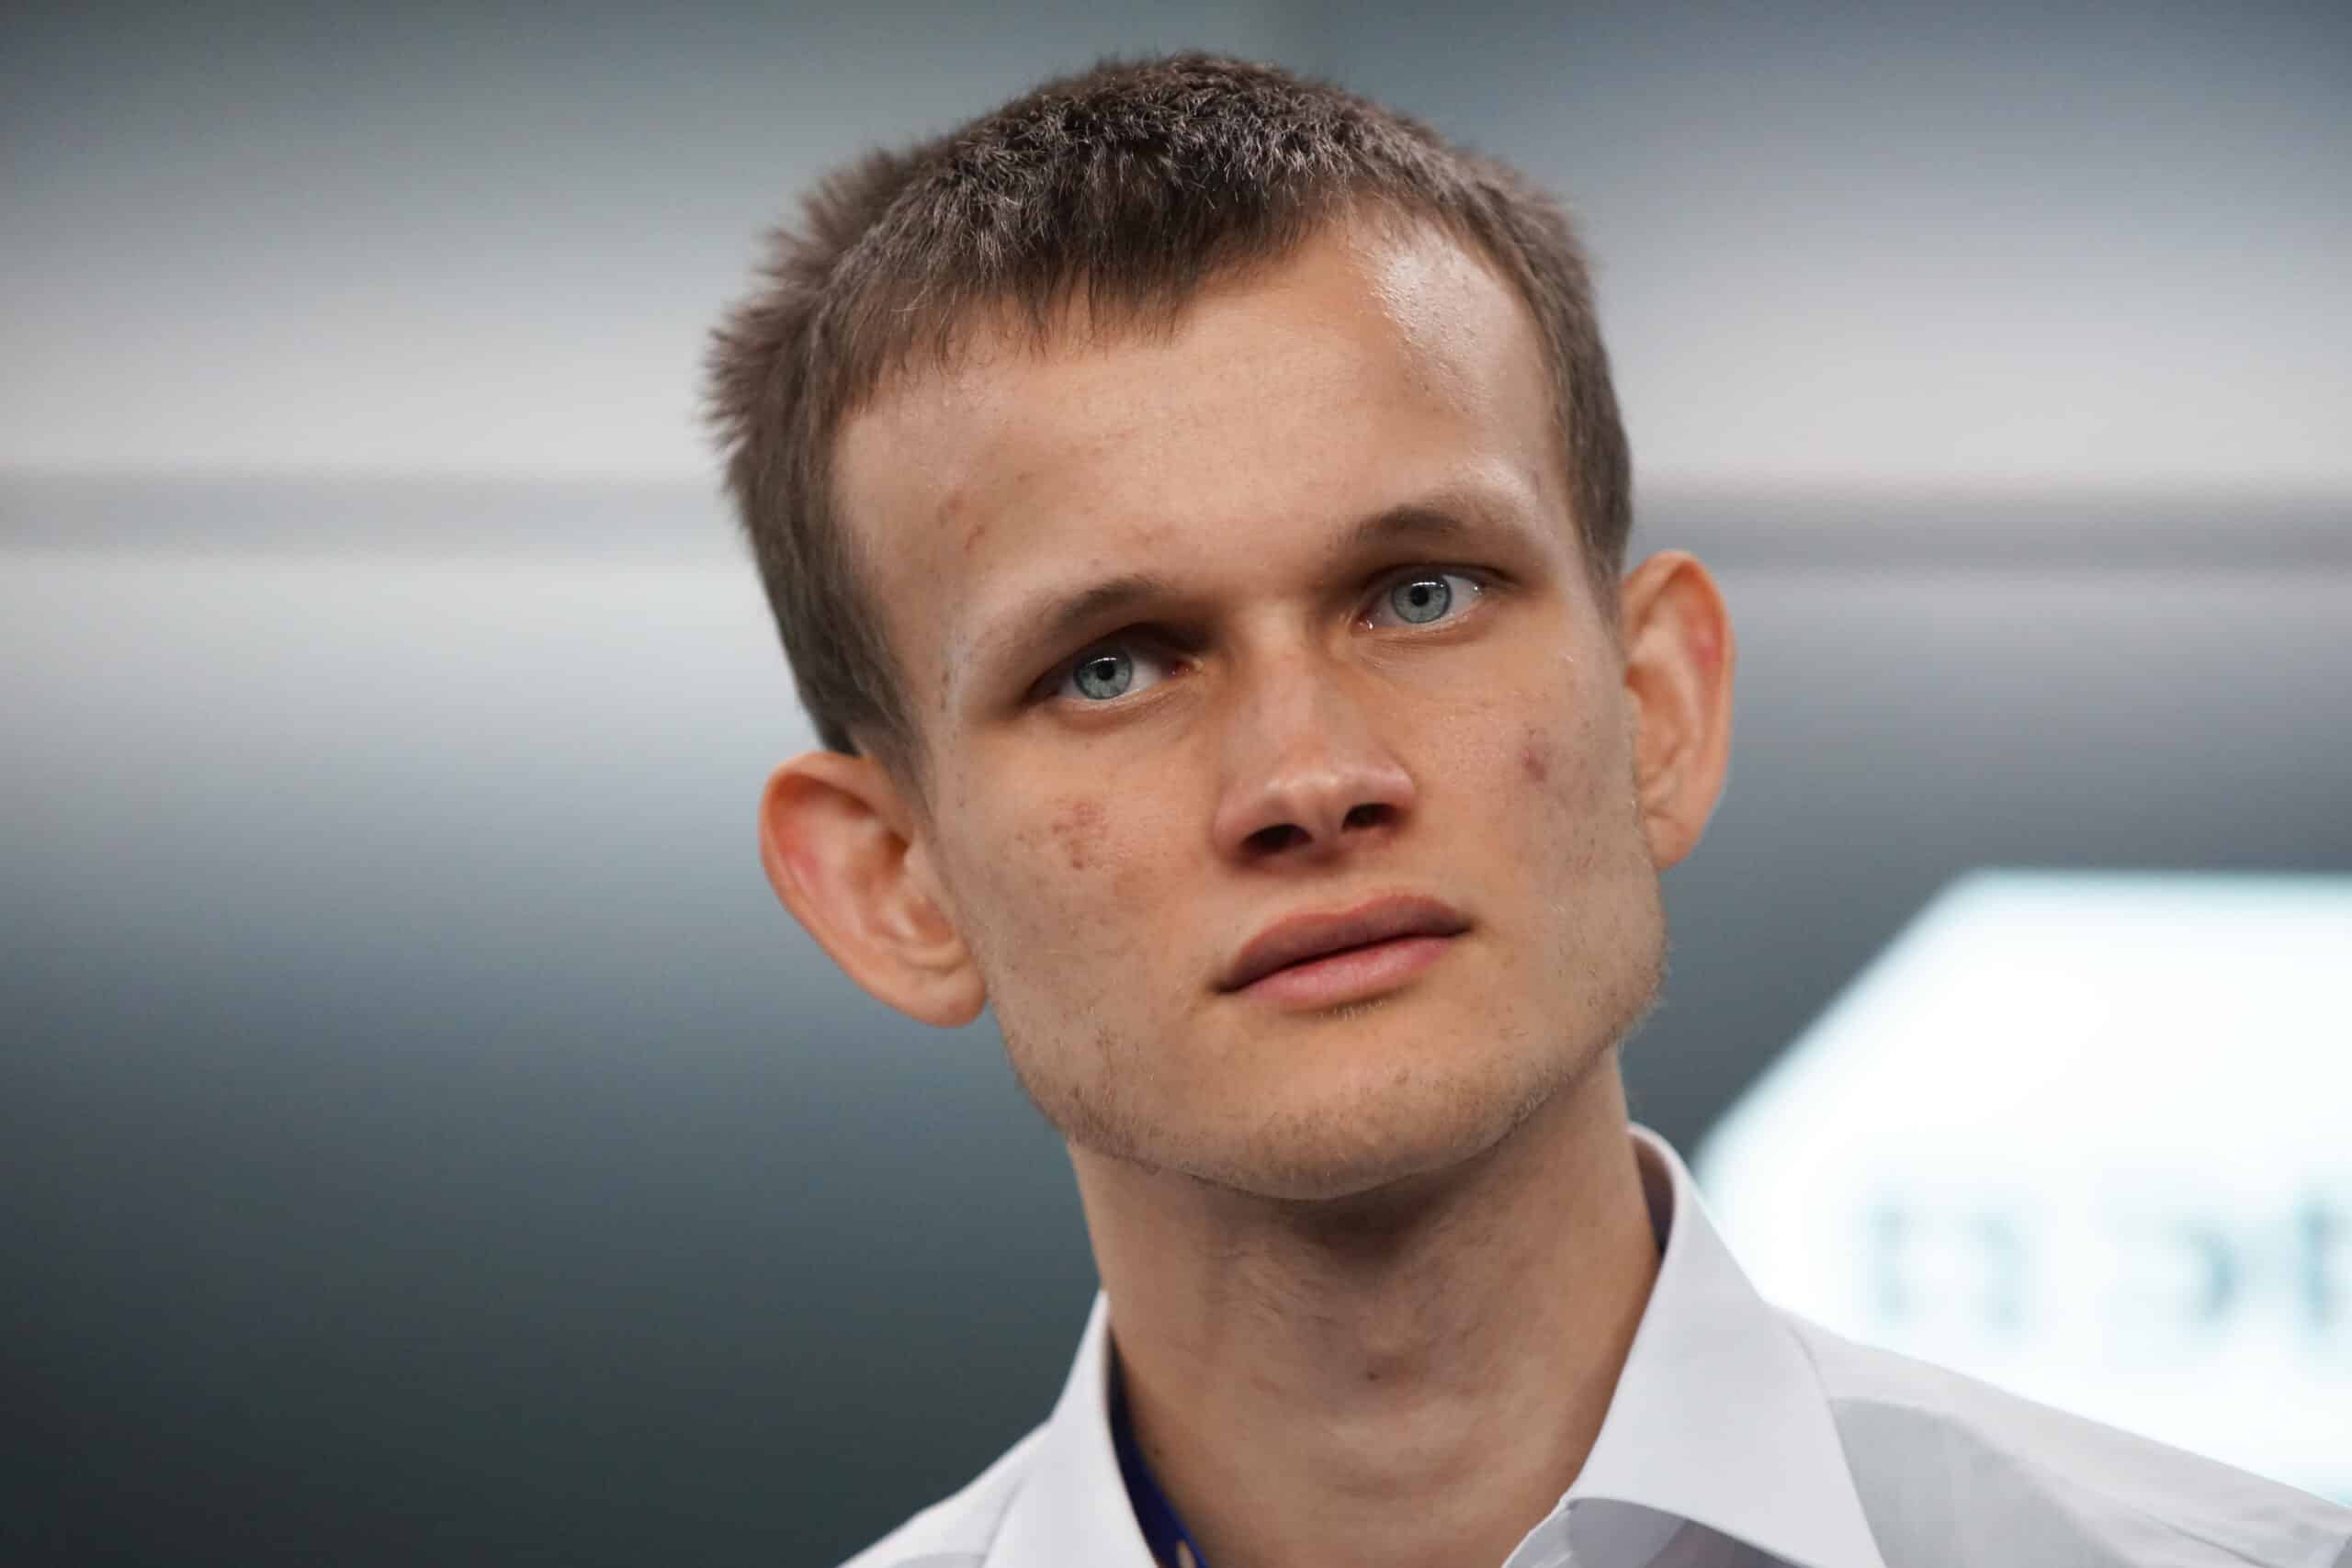 Saint Petersburg-Russia-09.05.2021: The founder of the Ethereum project is Vitalik Buterin.